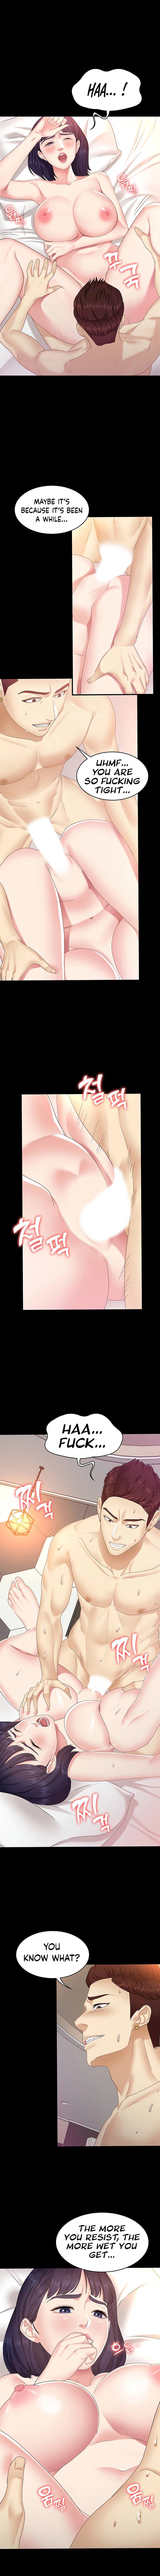 shes-my-younger-sister-but-its-okay-chap-3-2